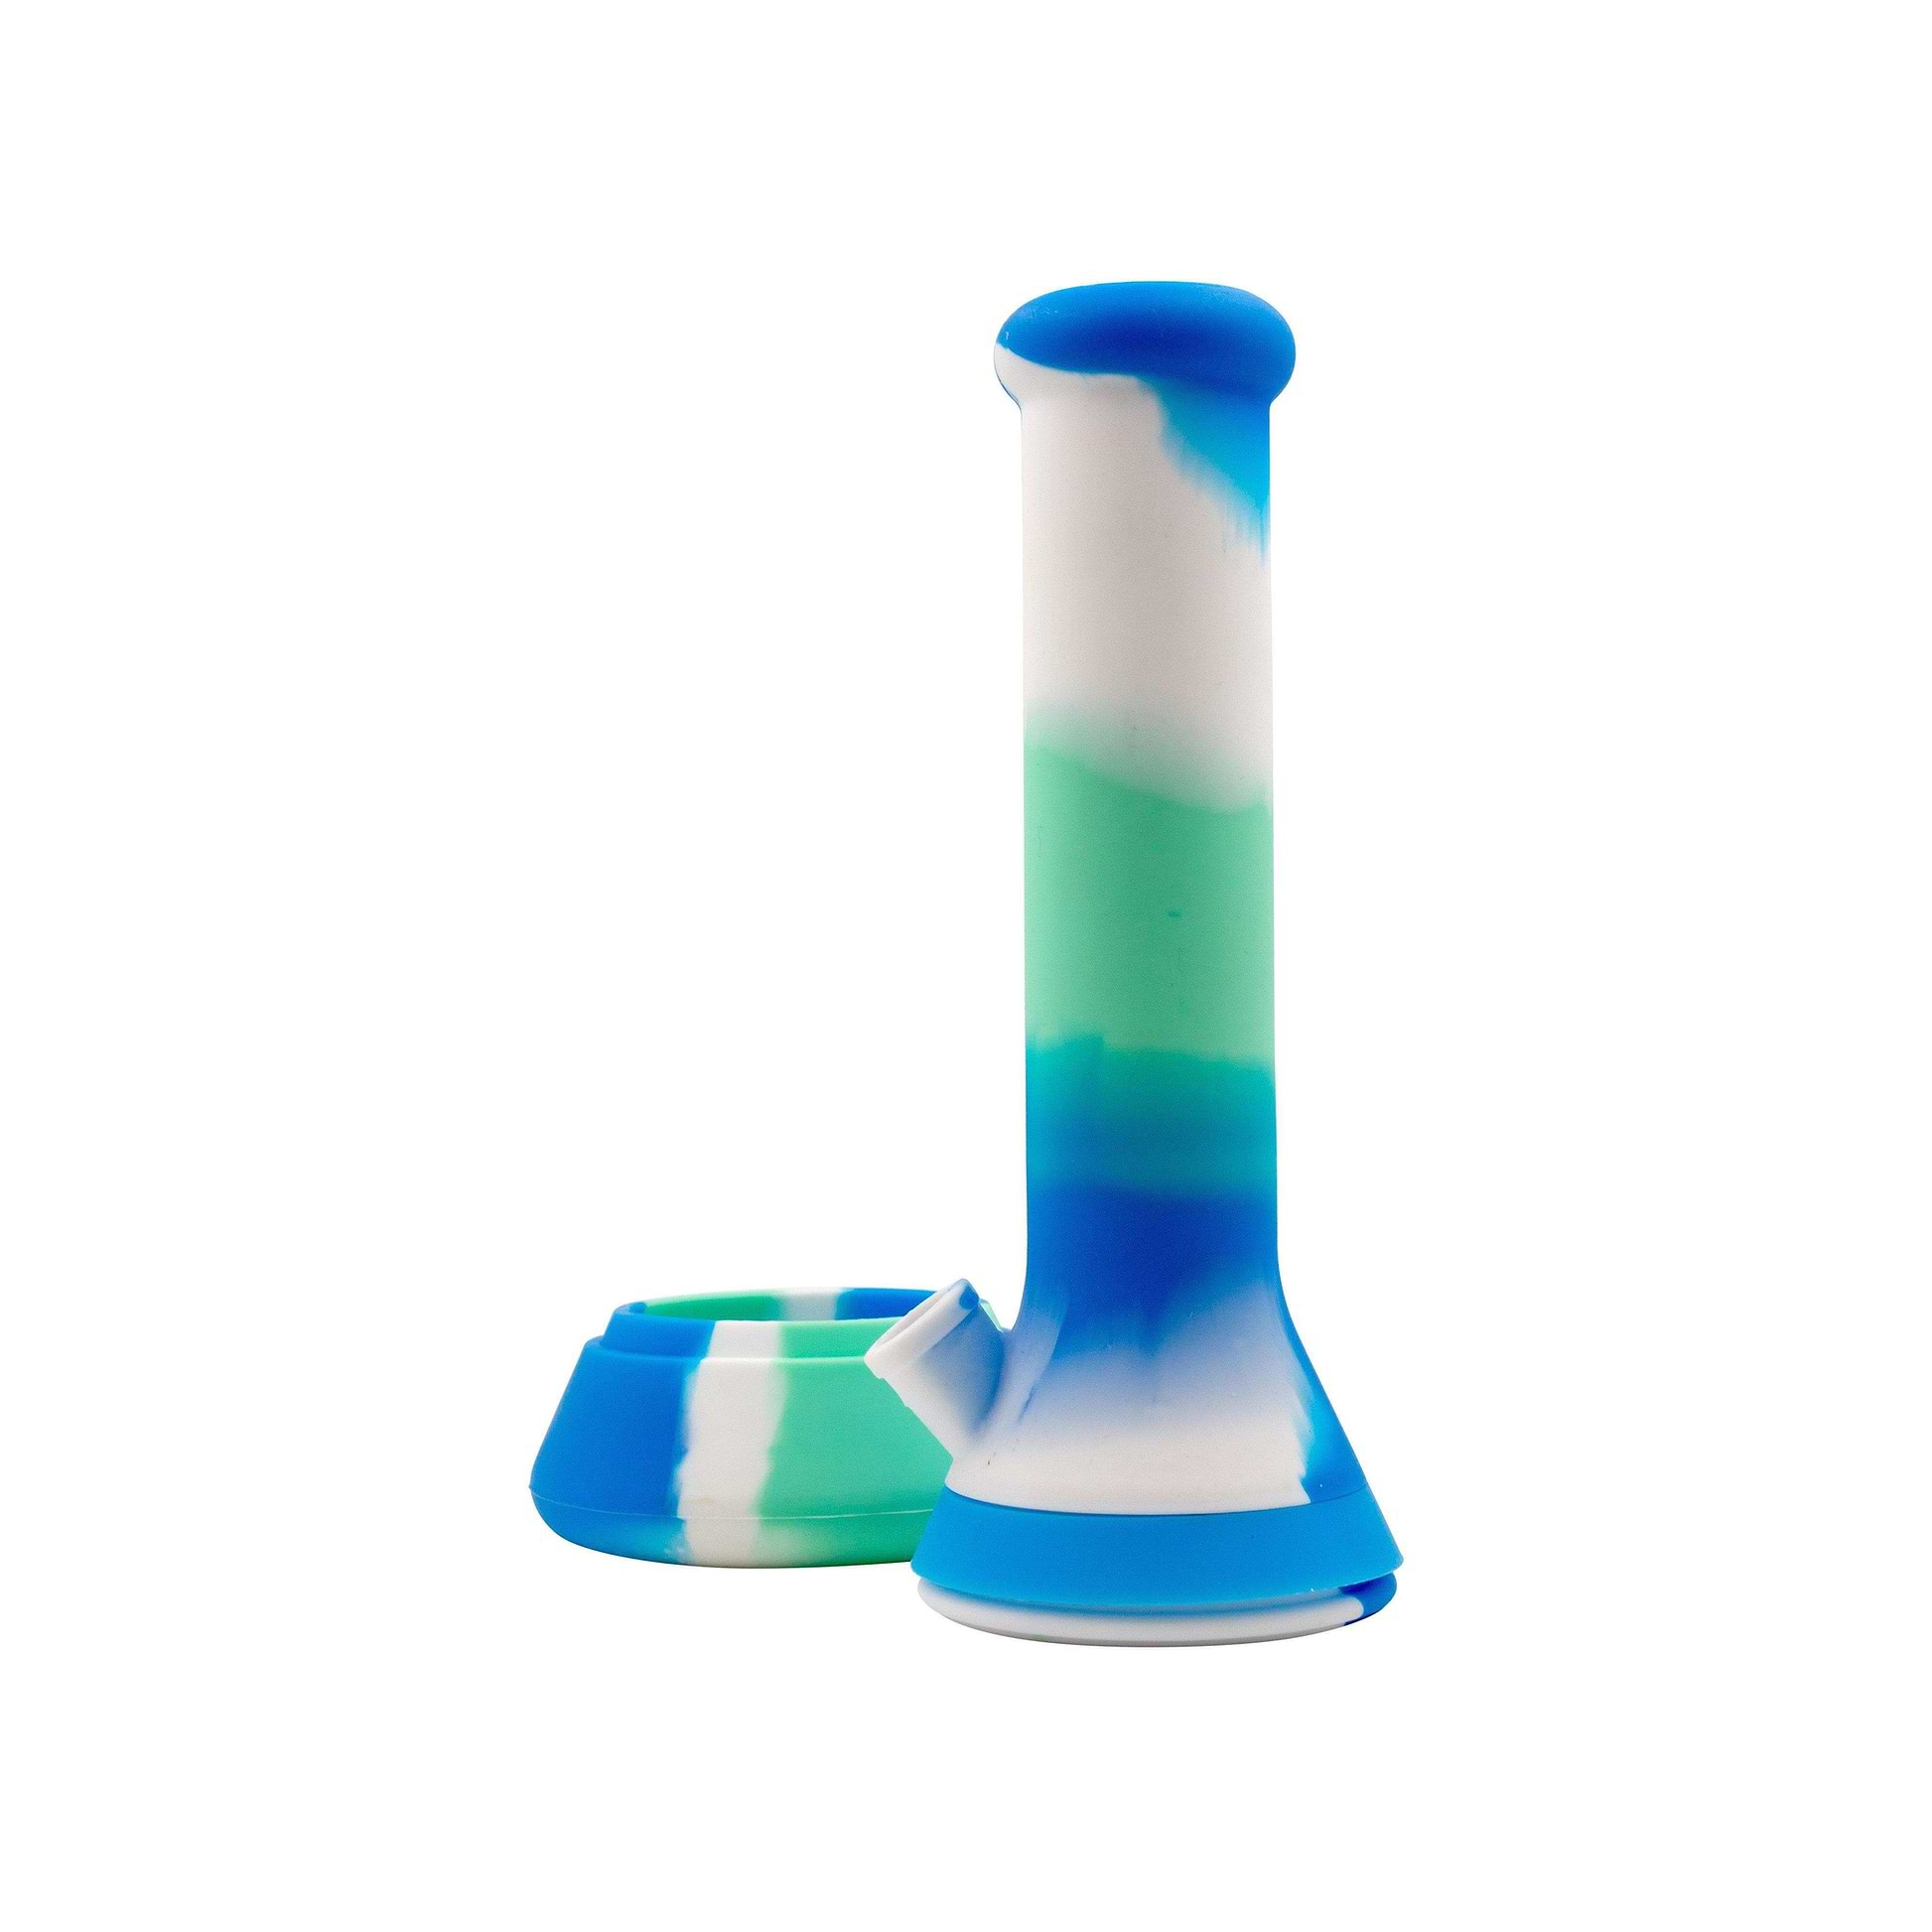 Set of 12-inch bong made of silicone fun swirly colors